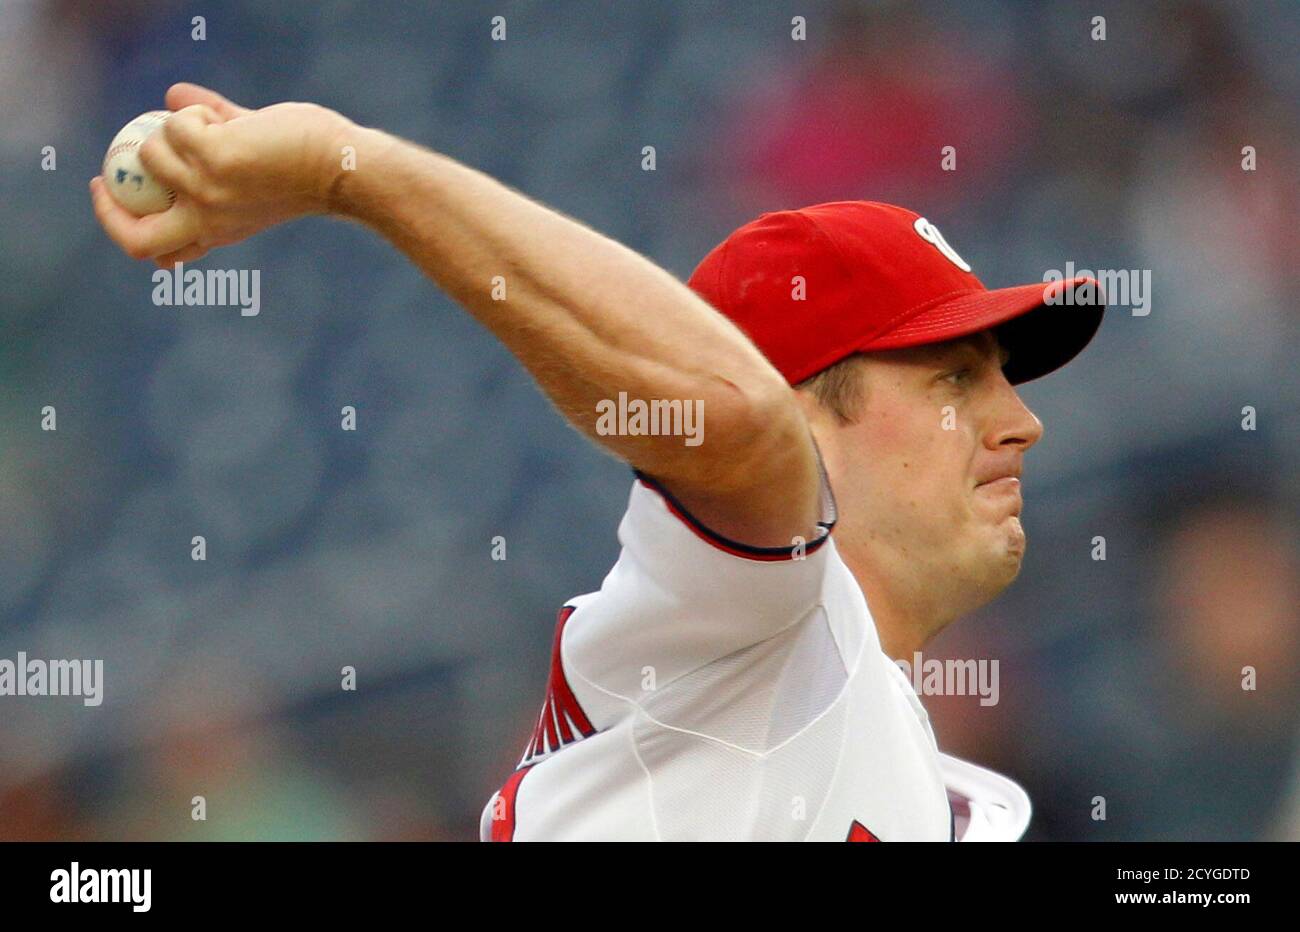 Washington Nationals starting pitcher Jordan Zimmermann throws in the first inning against the New York Mets at Nationals Park in Washington, June 5, 2012.     REUTERS/Jason Reed  (UNITED STATES - Tags: SPORT BASEBALL) Stock Photo